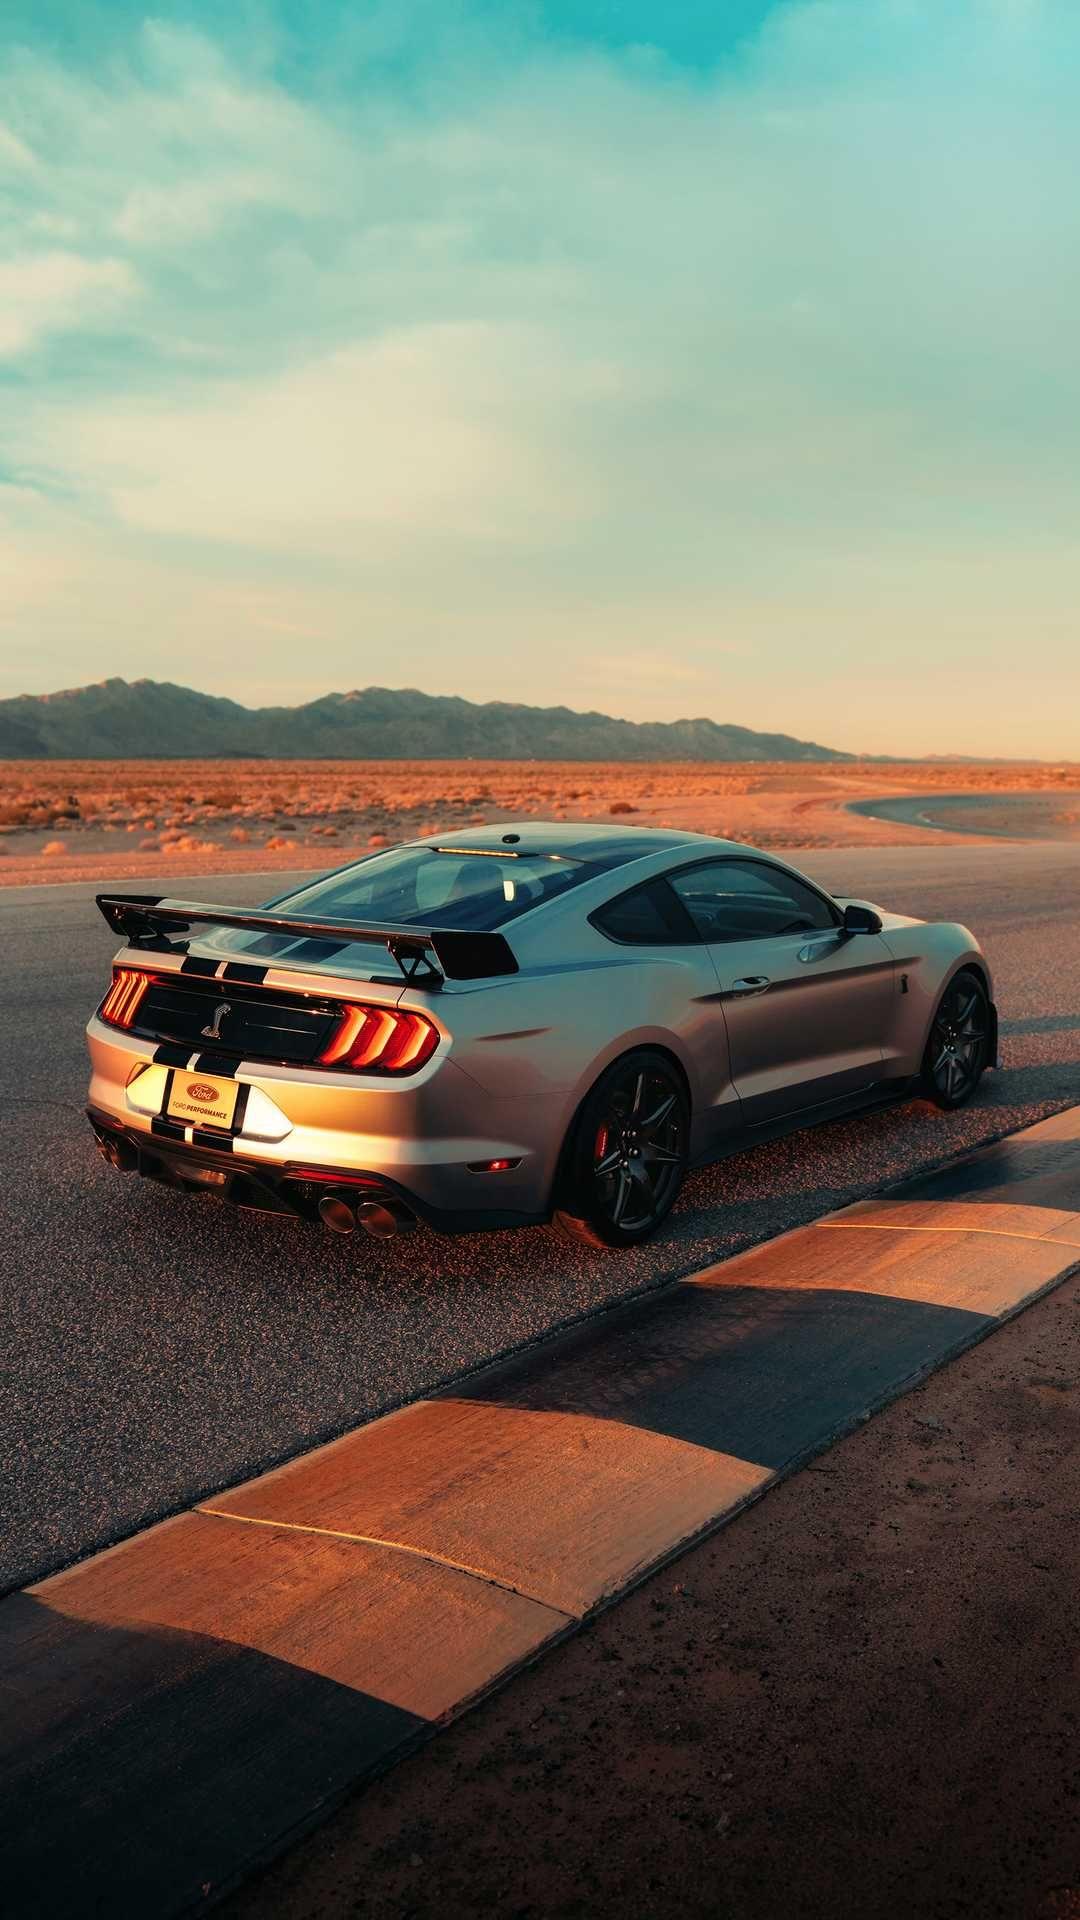 New, 2020 Ford Mustang Shelby GT500, silver side